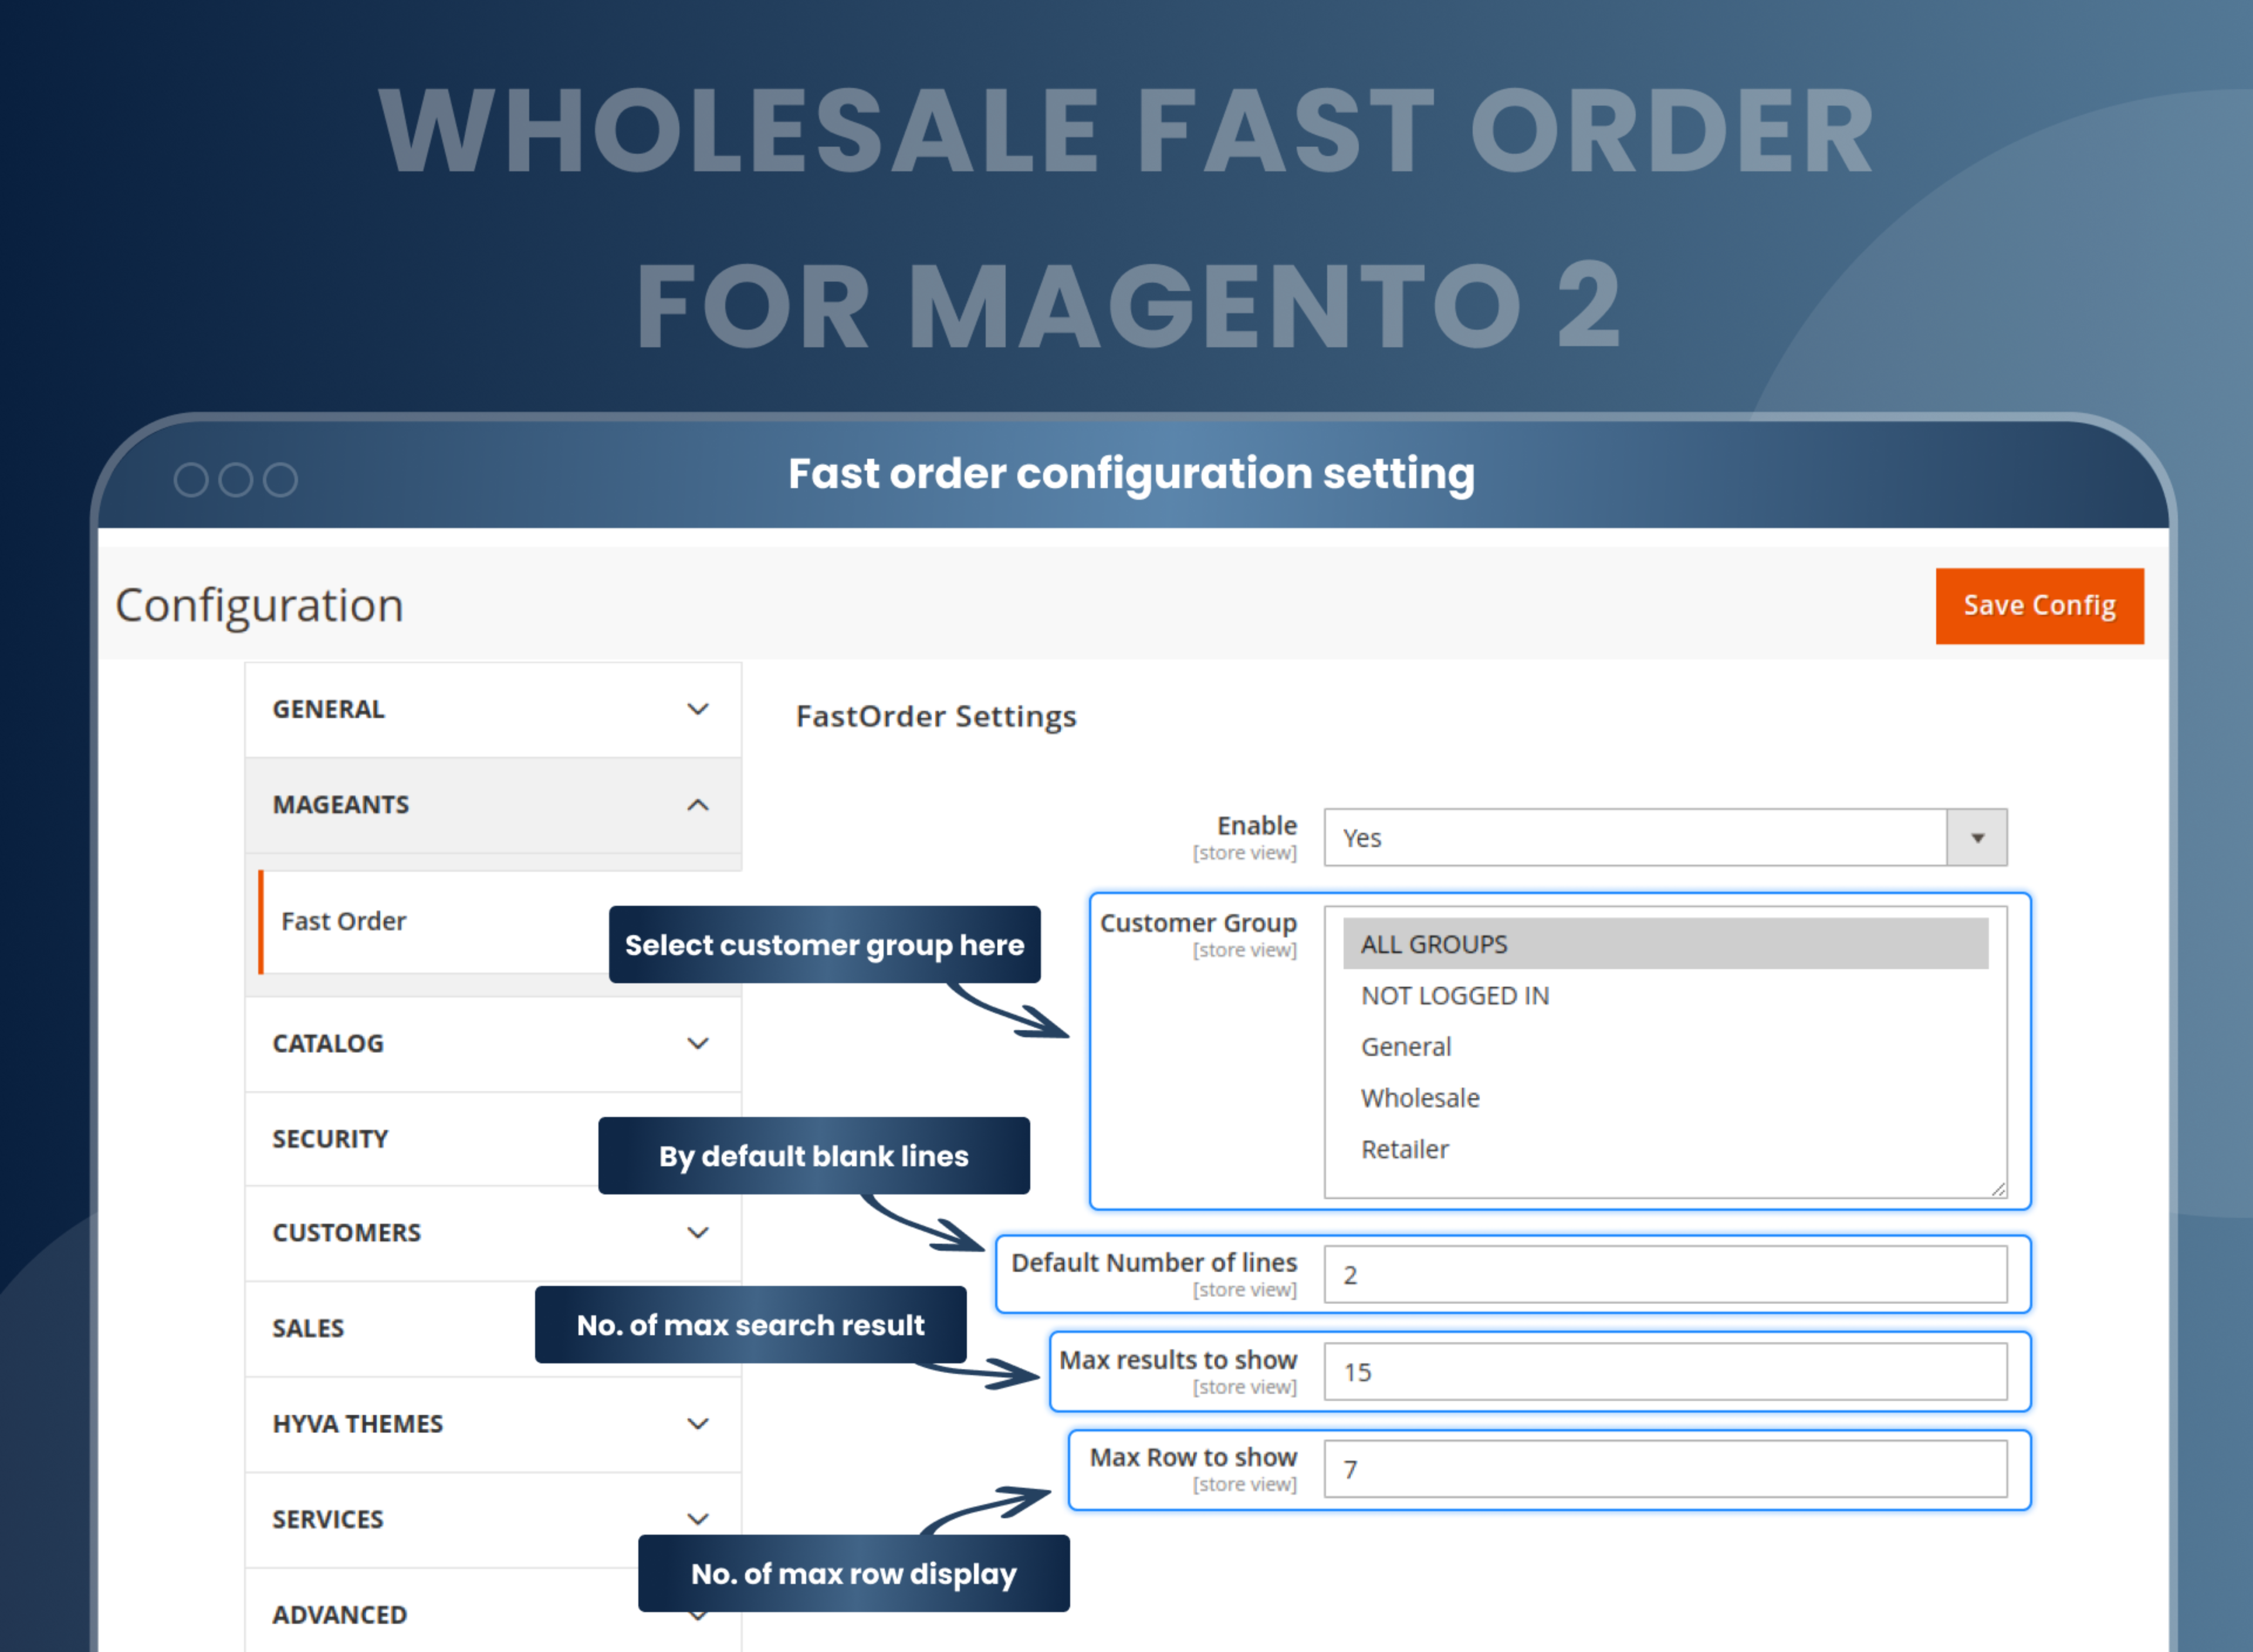 Fast order configuration setting